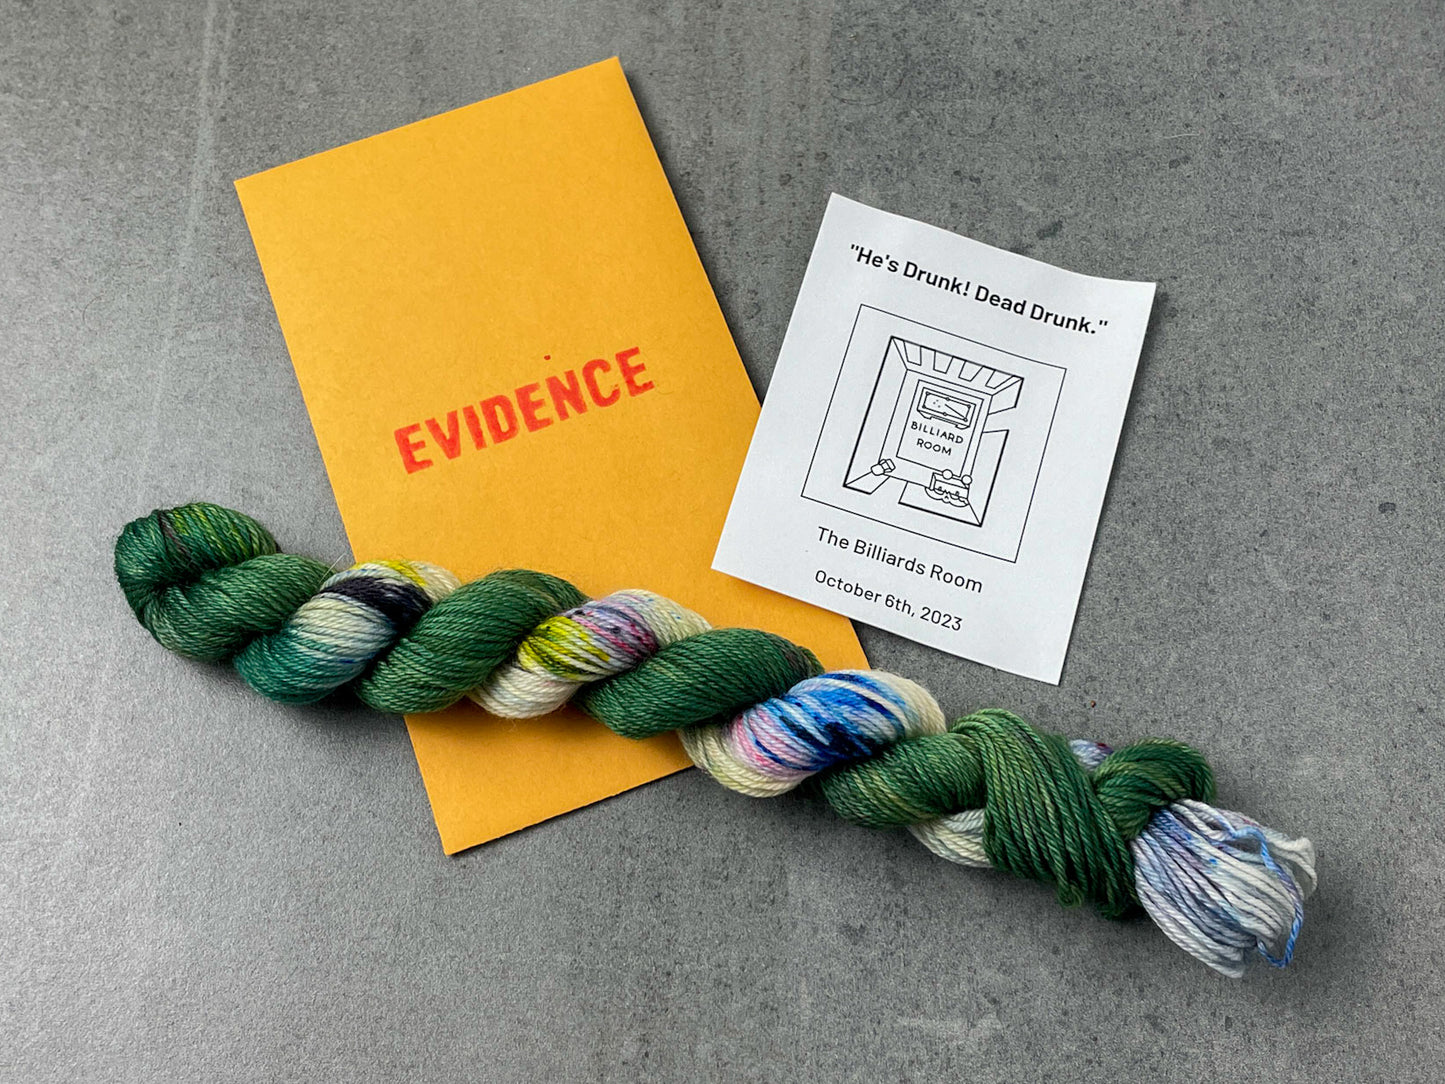 A skein of green and speckled yarn on top of an envelope stamped with "Evidence" and a card with a birds-eye drawing of the billiard room on it.